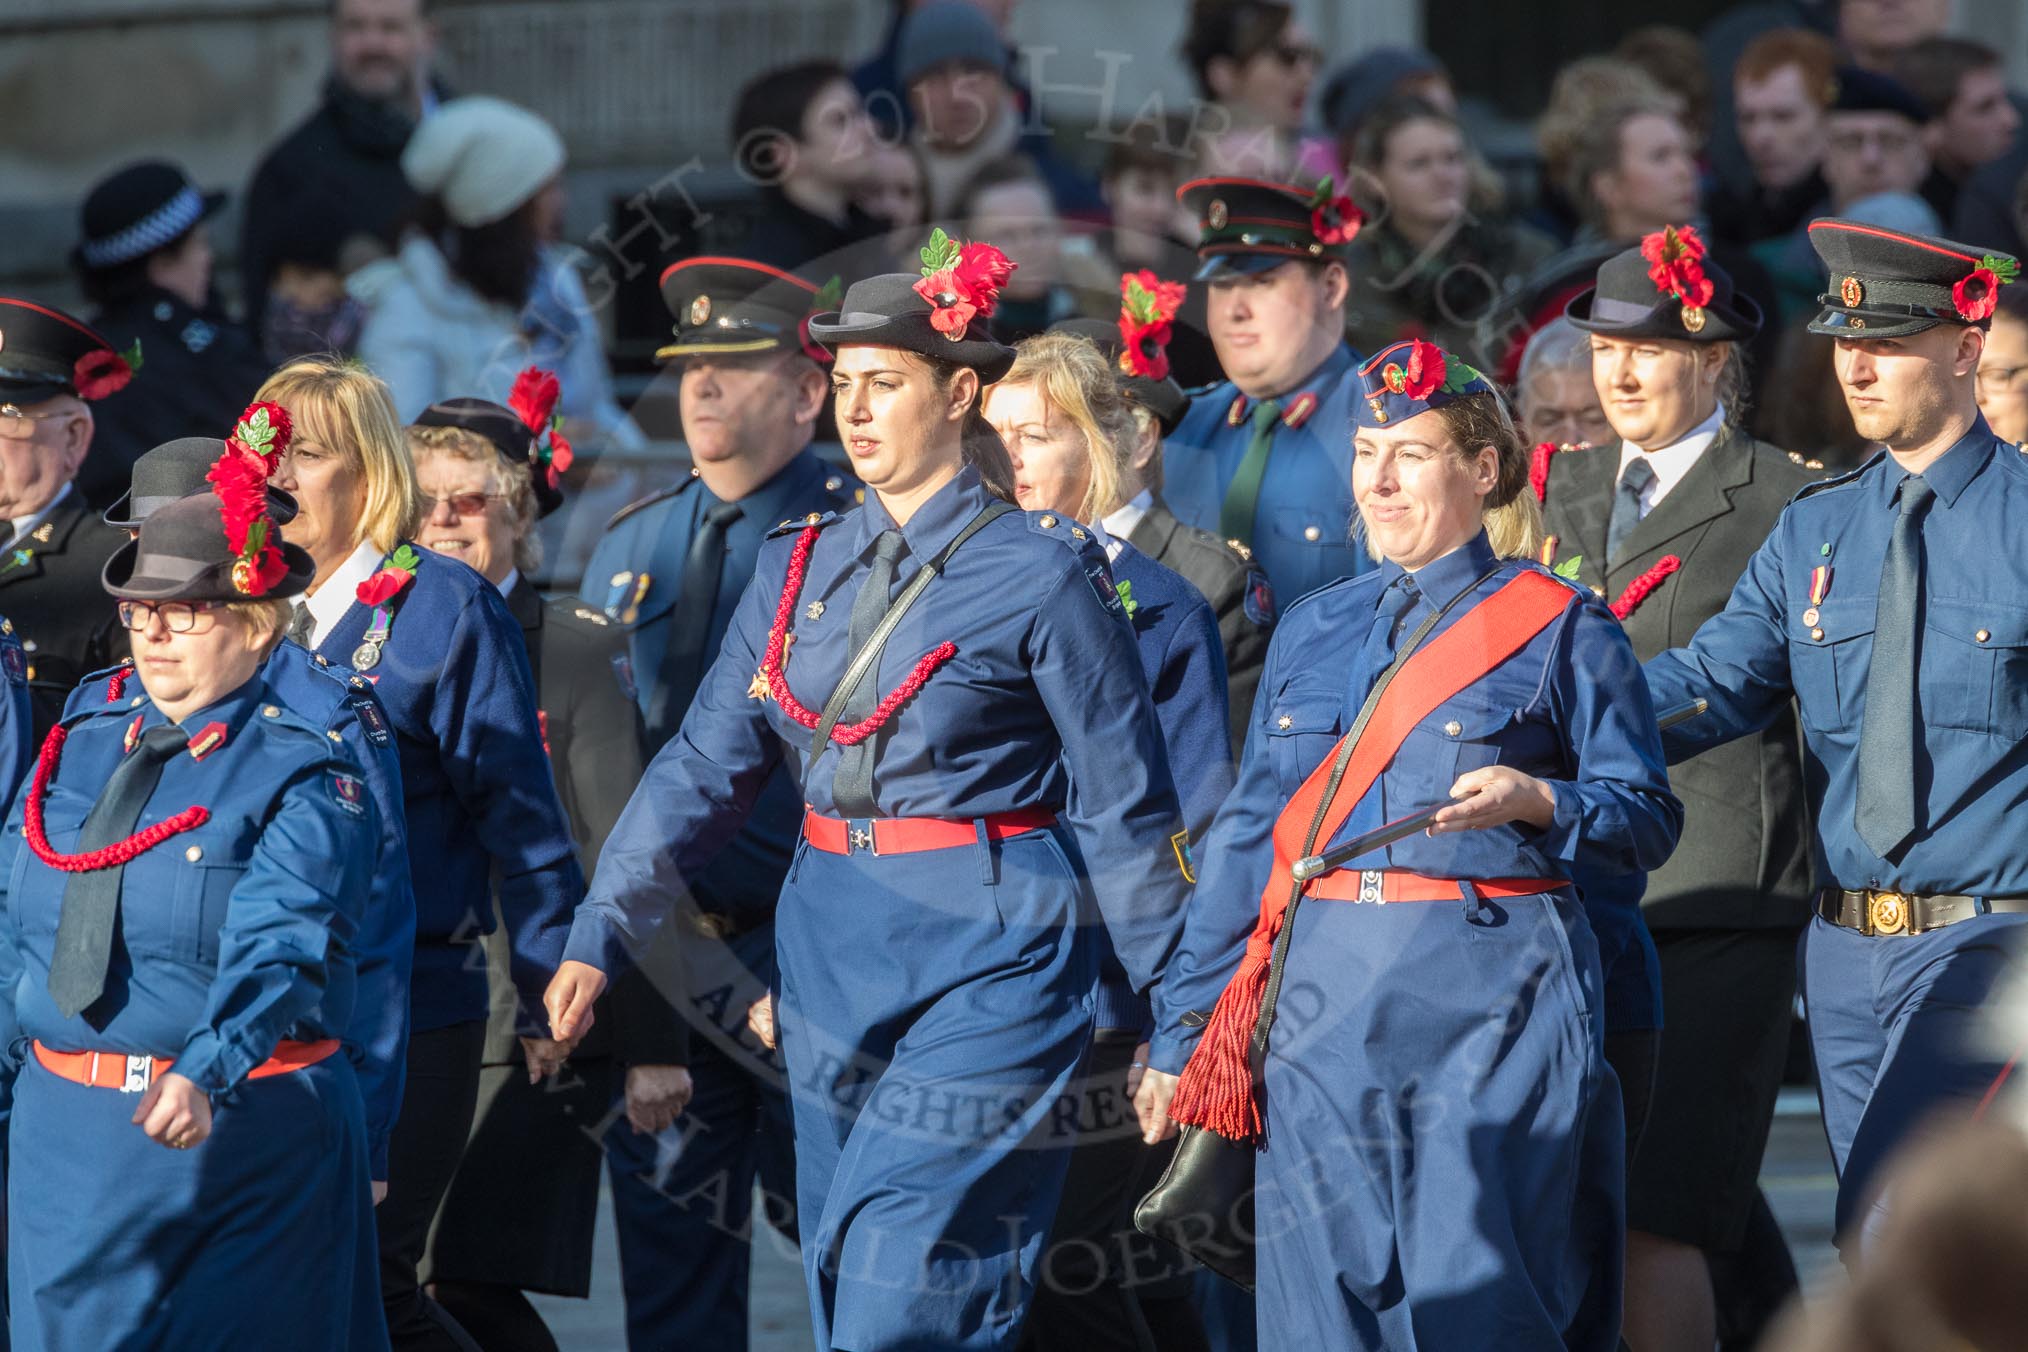 March Past, Remembrance Sunday at the Cenotaph 2016: M36 Church Lads & Church Girls Brigade.
Cenotaph, Whitehall, London SW1,
London,
Greater London,
United Kingdom,
on 13 November 2016 at 13:19, image #2895